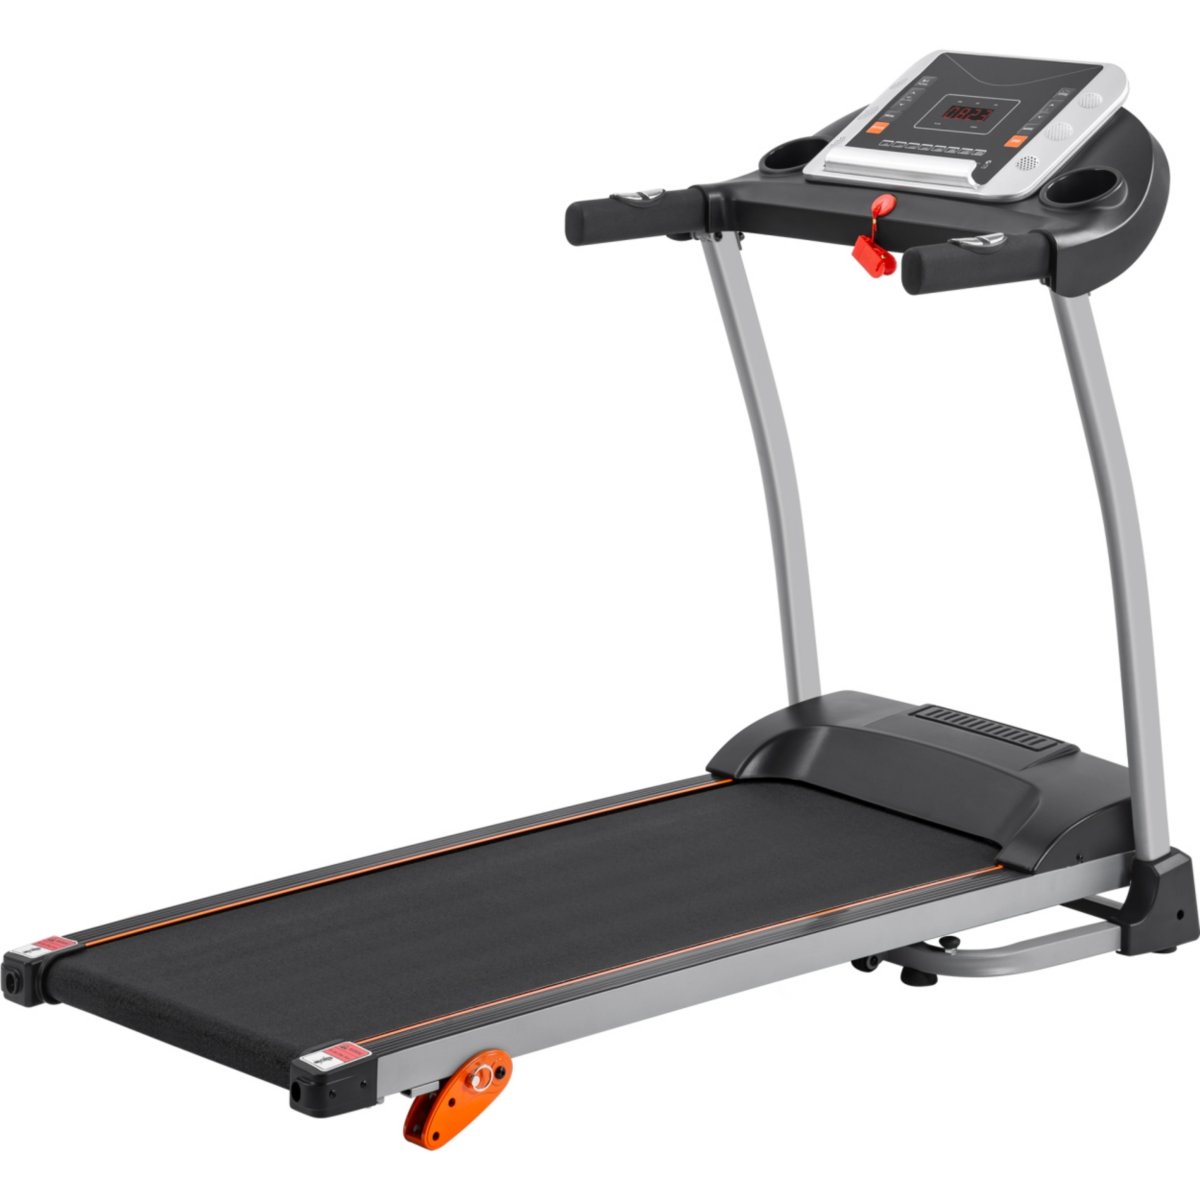 Easy Folding Treadmill For Home Use, 1.5Hp Electric Running, Jogging & Walking Machine - Black